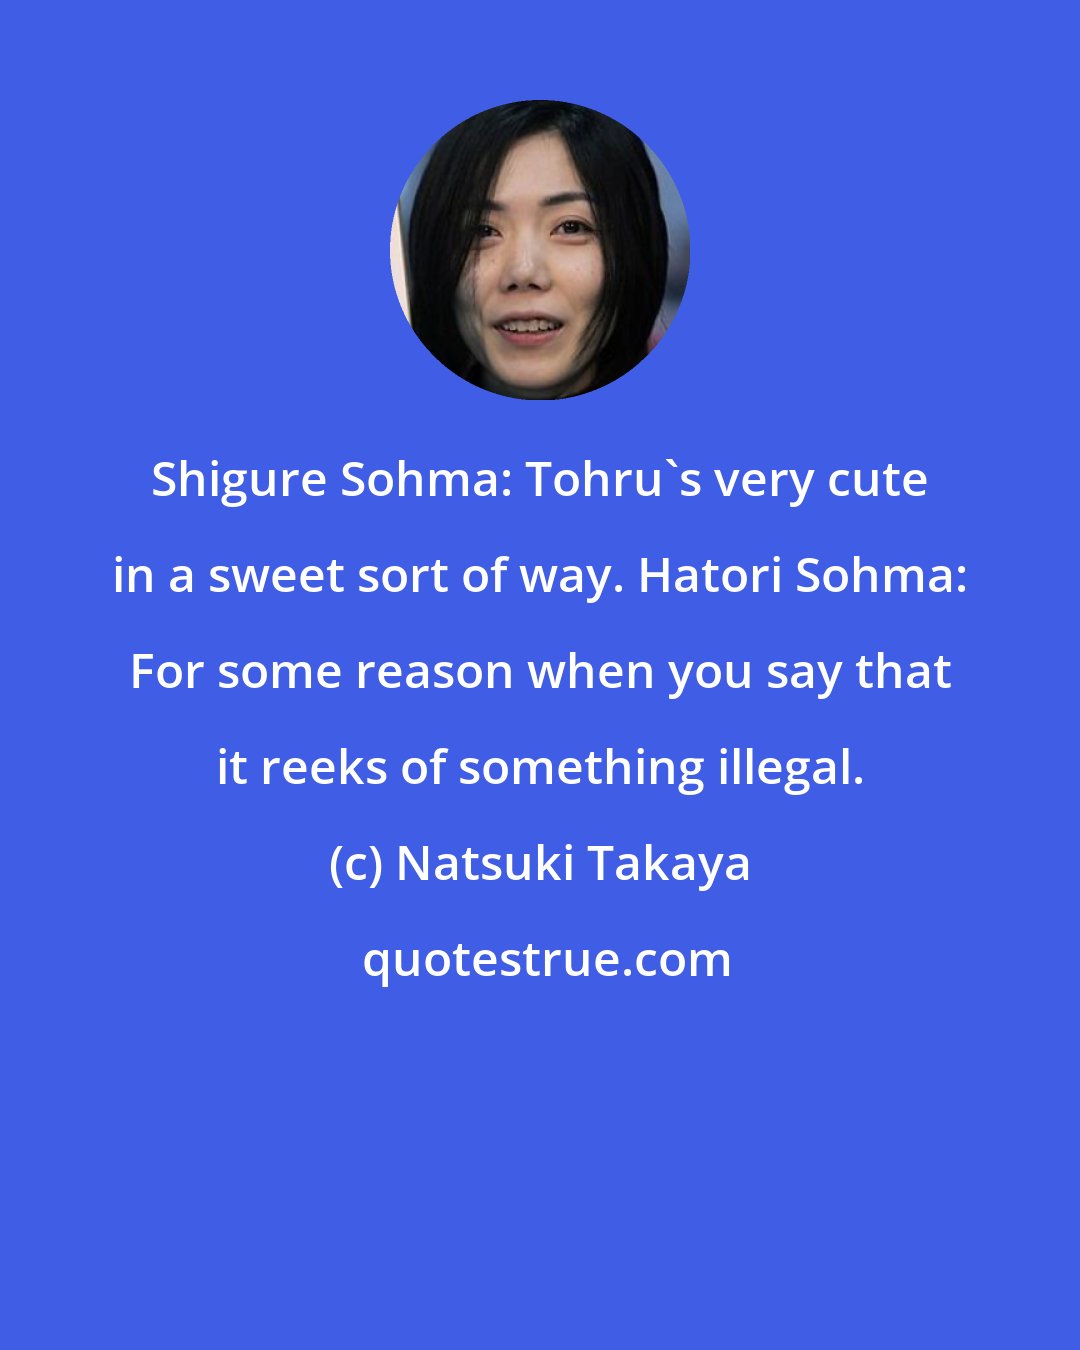 Natsuki Takaya: Shigure Sohma: Tohru's very cute in a sweet sort of way. Hatori Sohma: For some reason when you say that it reeks of something illegal.